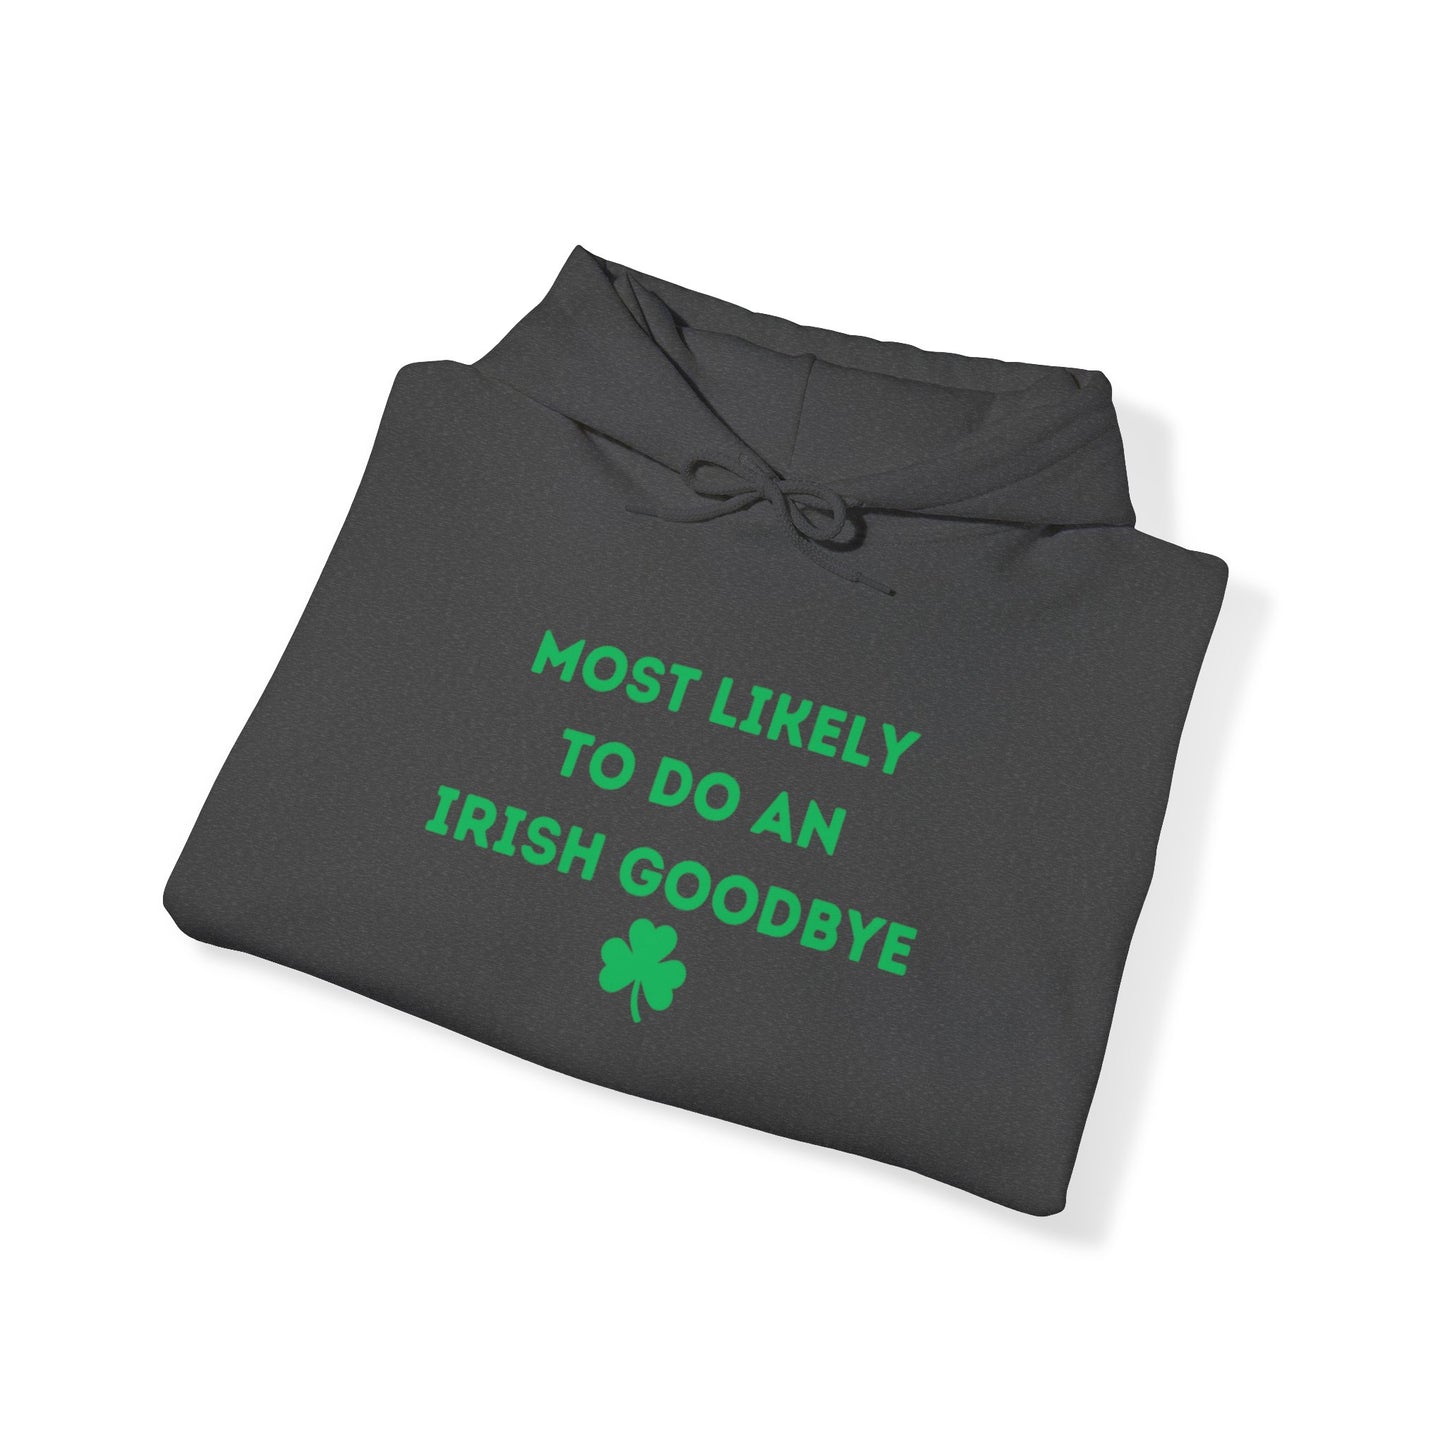 "Most Likely to do an Irish Goodbye" - Hoodie